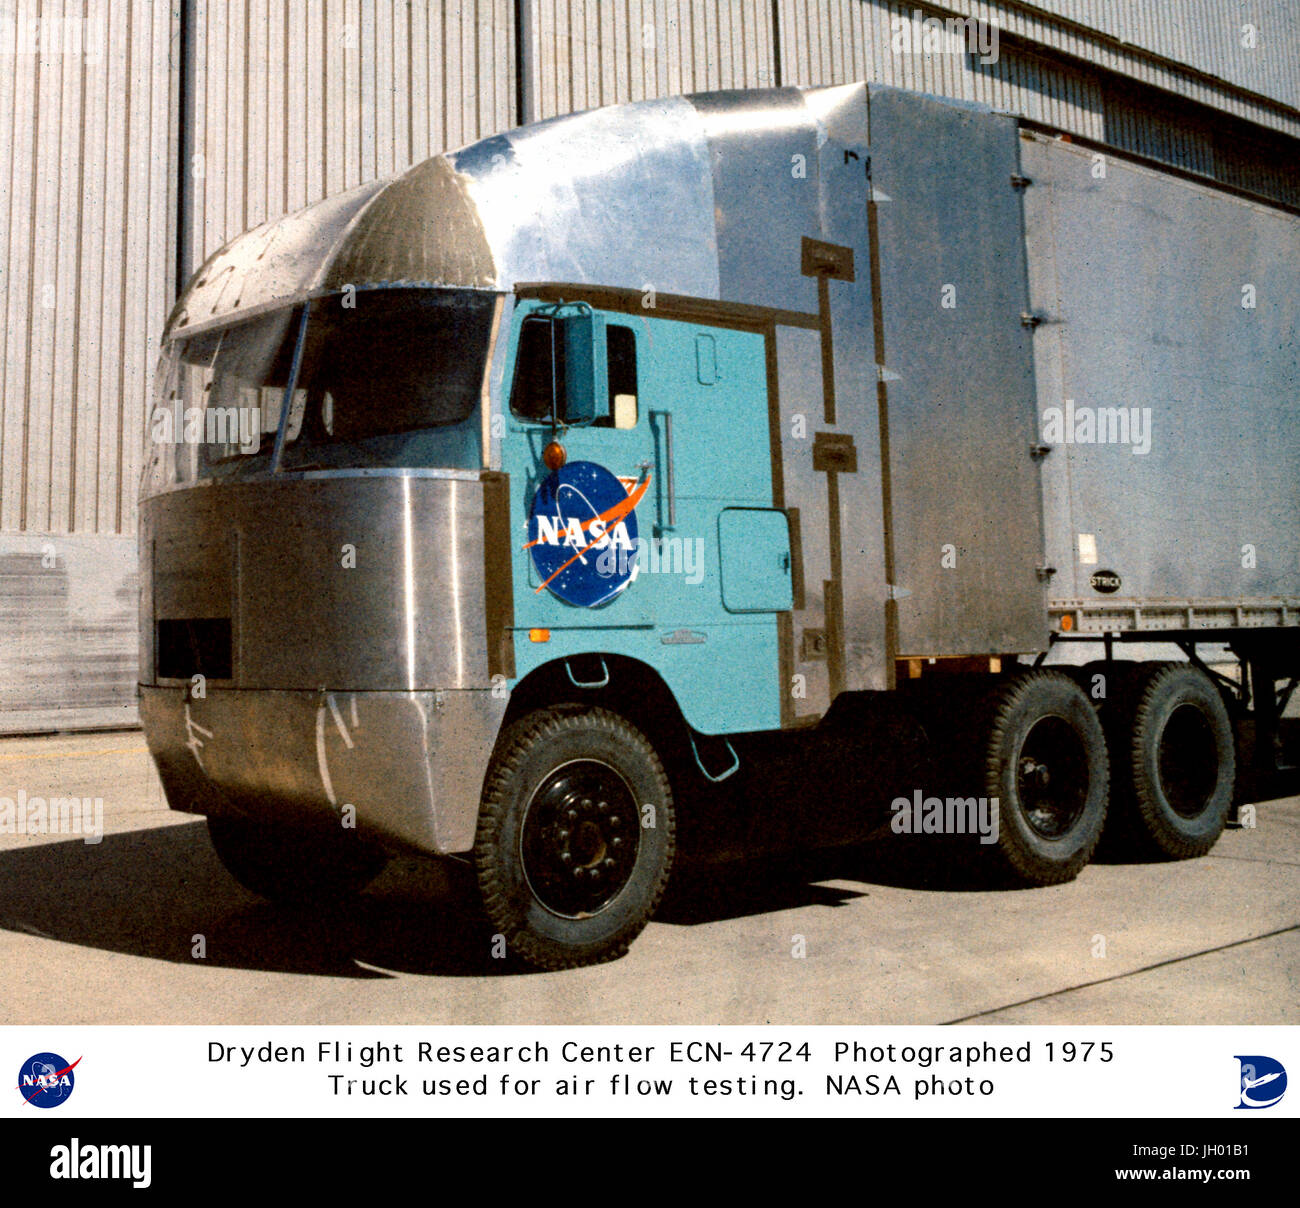 After leasing a cab-over tractor-trailer from a Southern California firm, Dryden researchers added sheet metal modifications like those shown here. They rounded the front corners and edges, and placed a smooth fairing on the cab's roofs and sides extending back to the trailer..During the investigation of truck aerodynamics, the techniques honed in flight research proved highly applicable. By closing the gap between the cab and the trailer, for example, researchers discovered a significant reduction in aerodynamic drag, one resulting in 20 to 25 percent less fuel consumption than the standard d Stock Photo